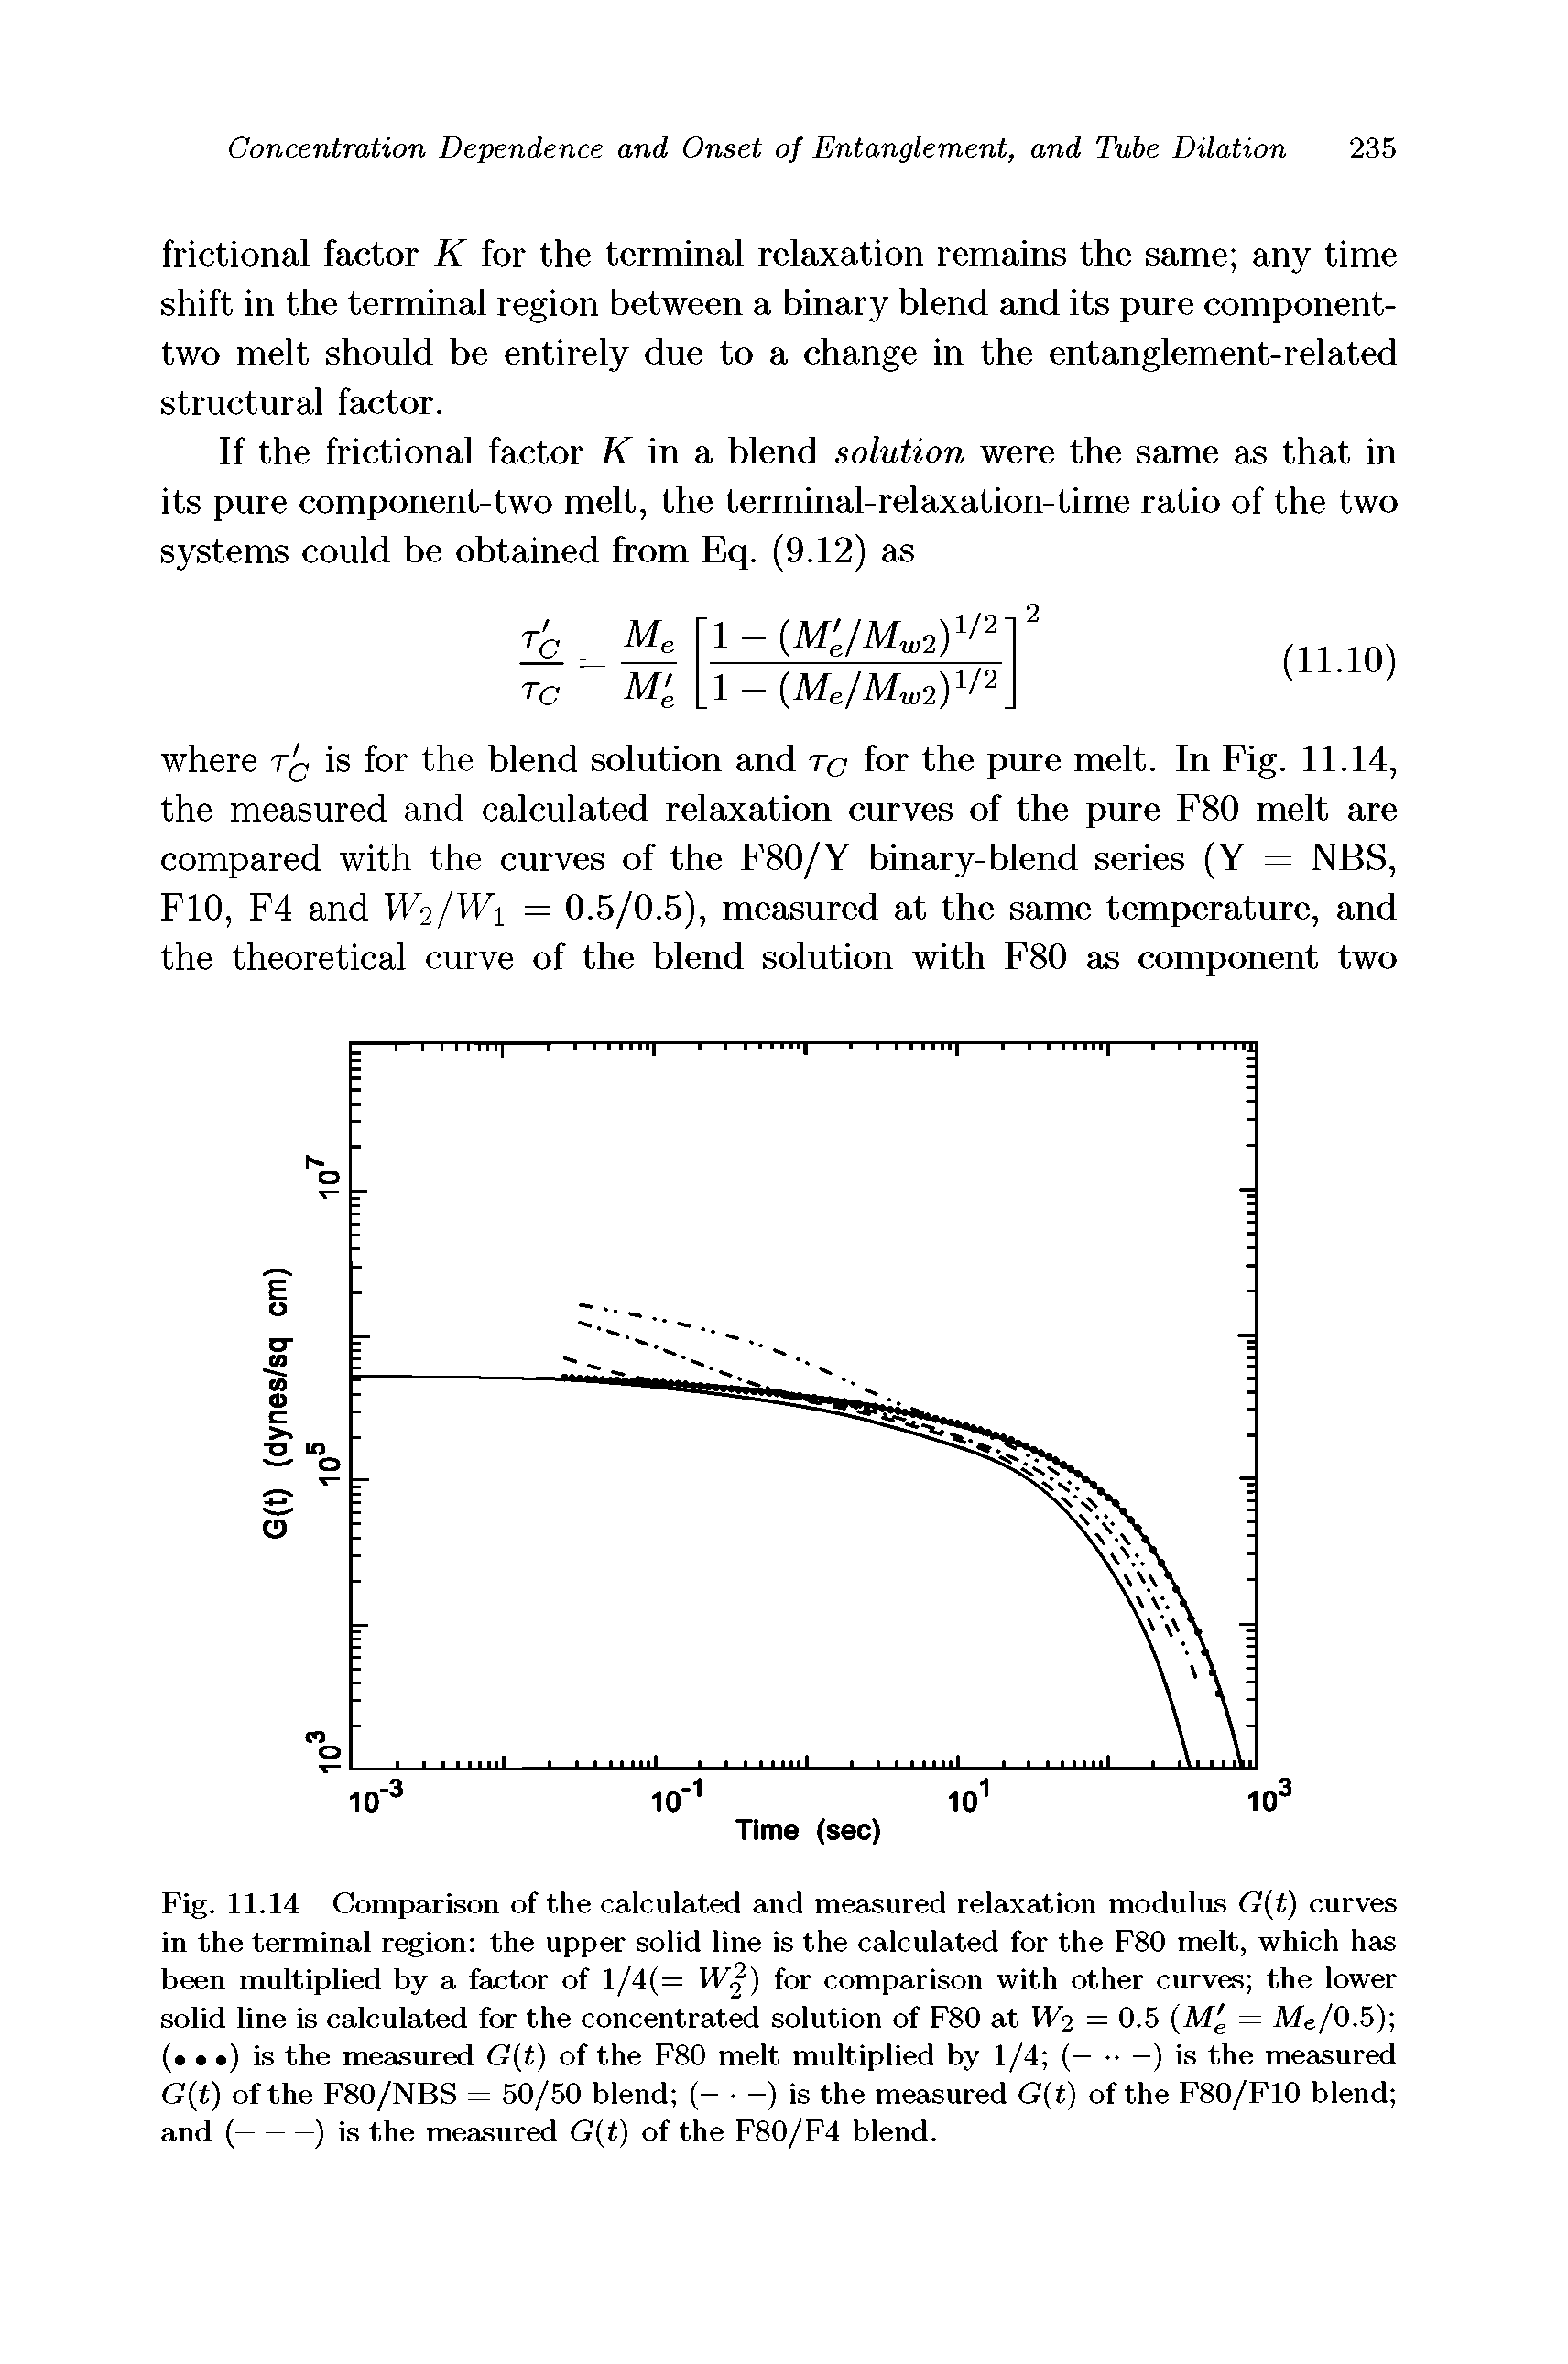 Fig. 11.14 Comparison of the calculated and measured relaxation modulus G(t) curves in the terminal region the upper solid line is the calculated for the F80 melt, which has been multiplied by a factor of l/4(= VFj) for comparison with other curves the lower solid line is calculated for the concentrated solution of F80 at W2 = 0.5 (M = Me/0.5) ( ) is the measured G(t) of the F80 melt multiplied by 1/4 (— —) is the measured G(t) of the F80/NBS = 50/50 blend (— —) is the measured G(t) of the F80/F10 blend and (-----) is the measured G(t) of the F80/F4 blend.